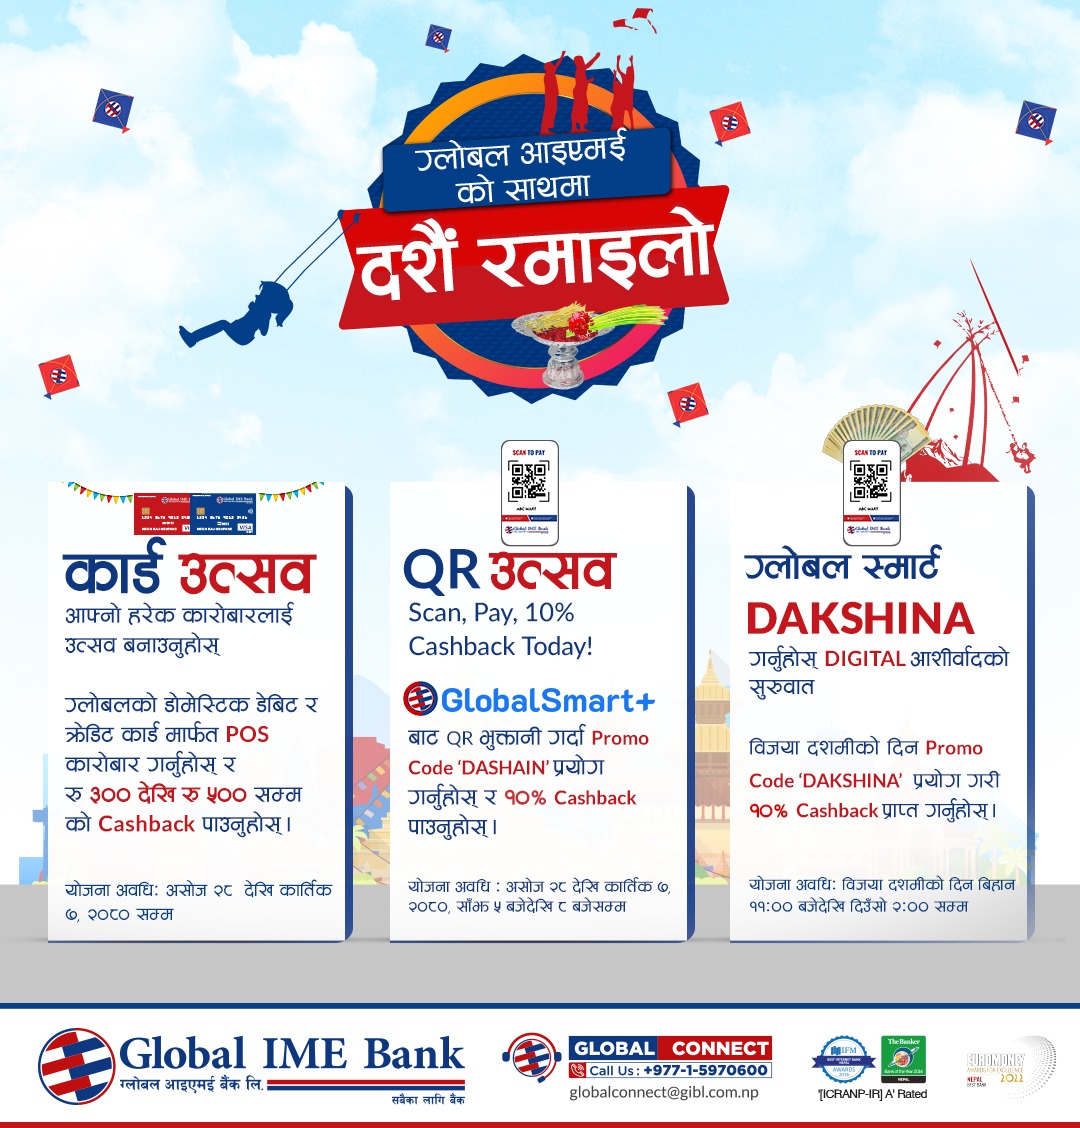 Design global ime bank smart plus qr scan and pay dashain cash back